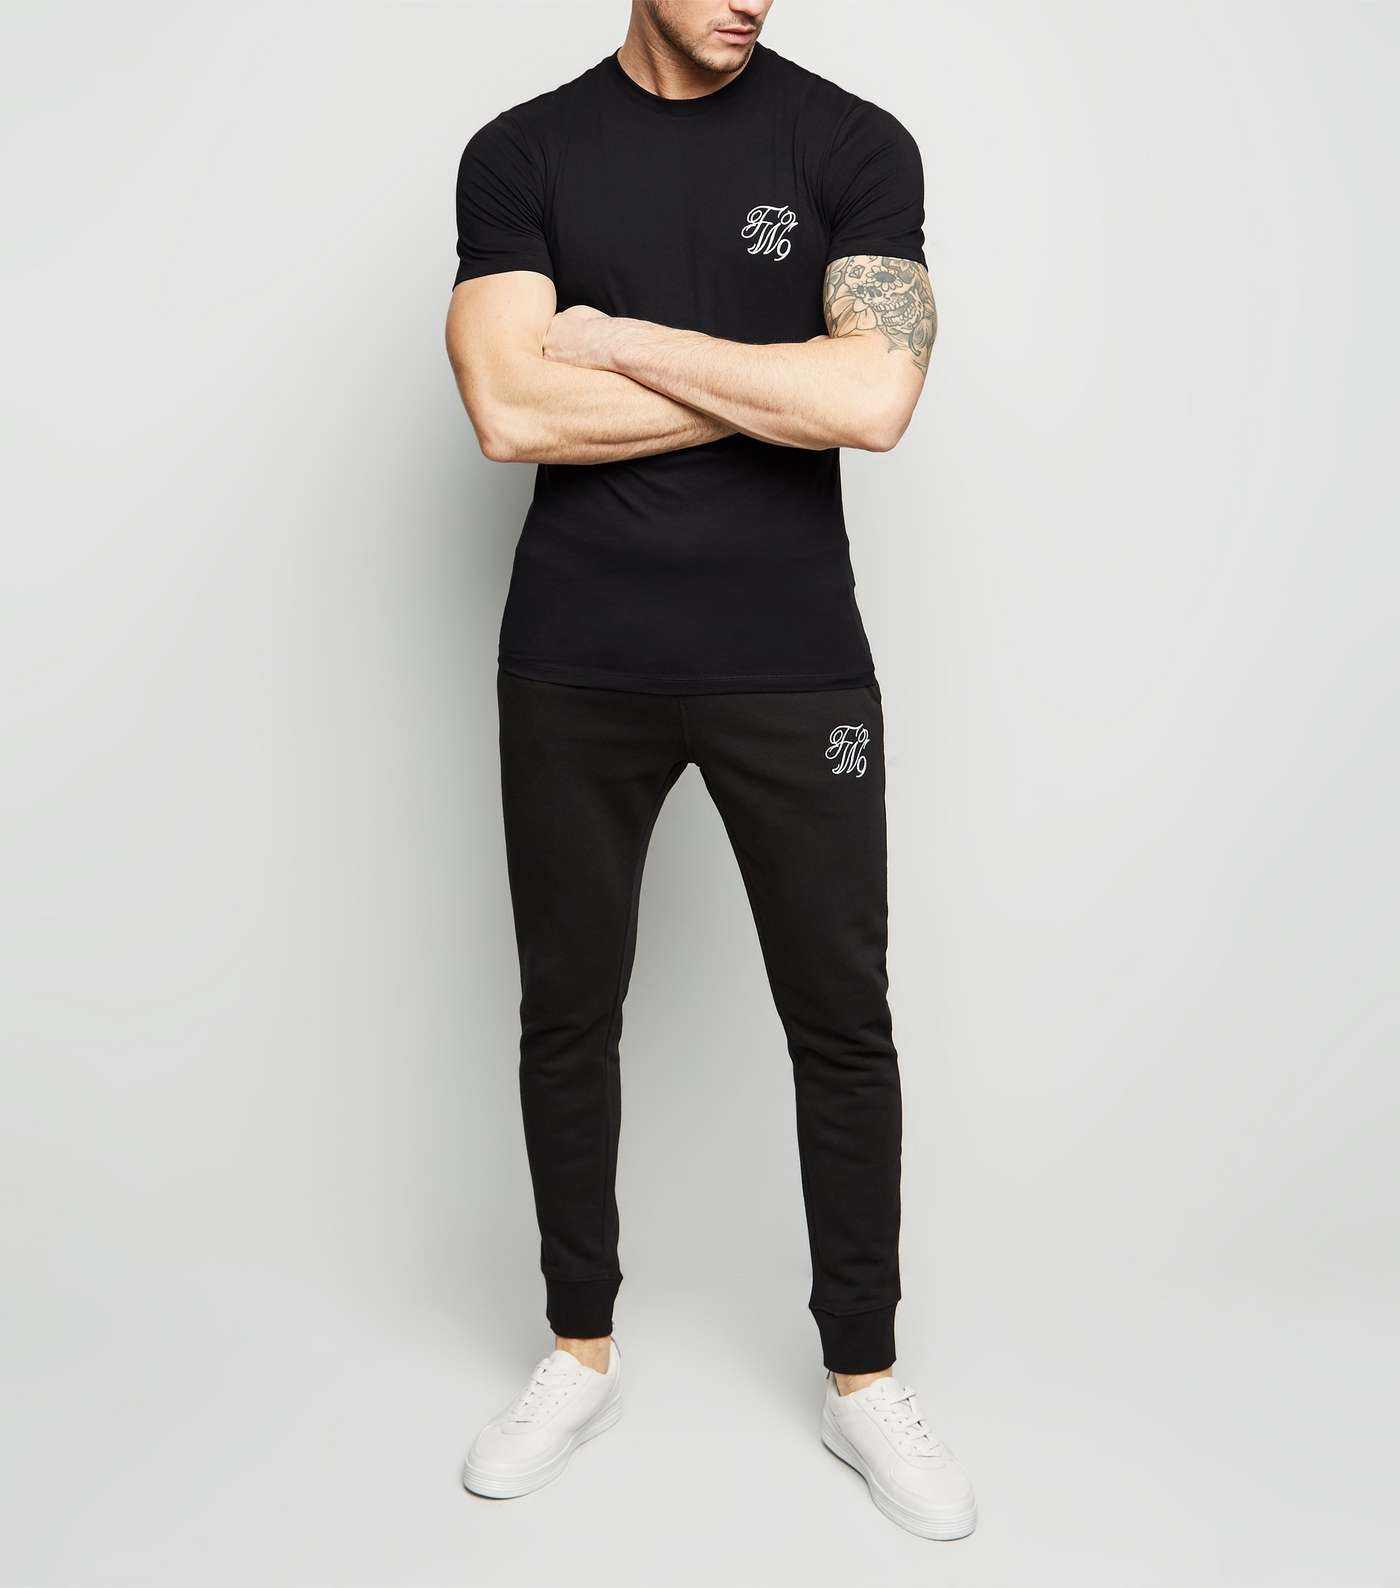 Black TW9 Embroidered Muscle Fit T-Shirt Image 2